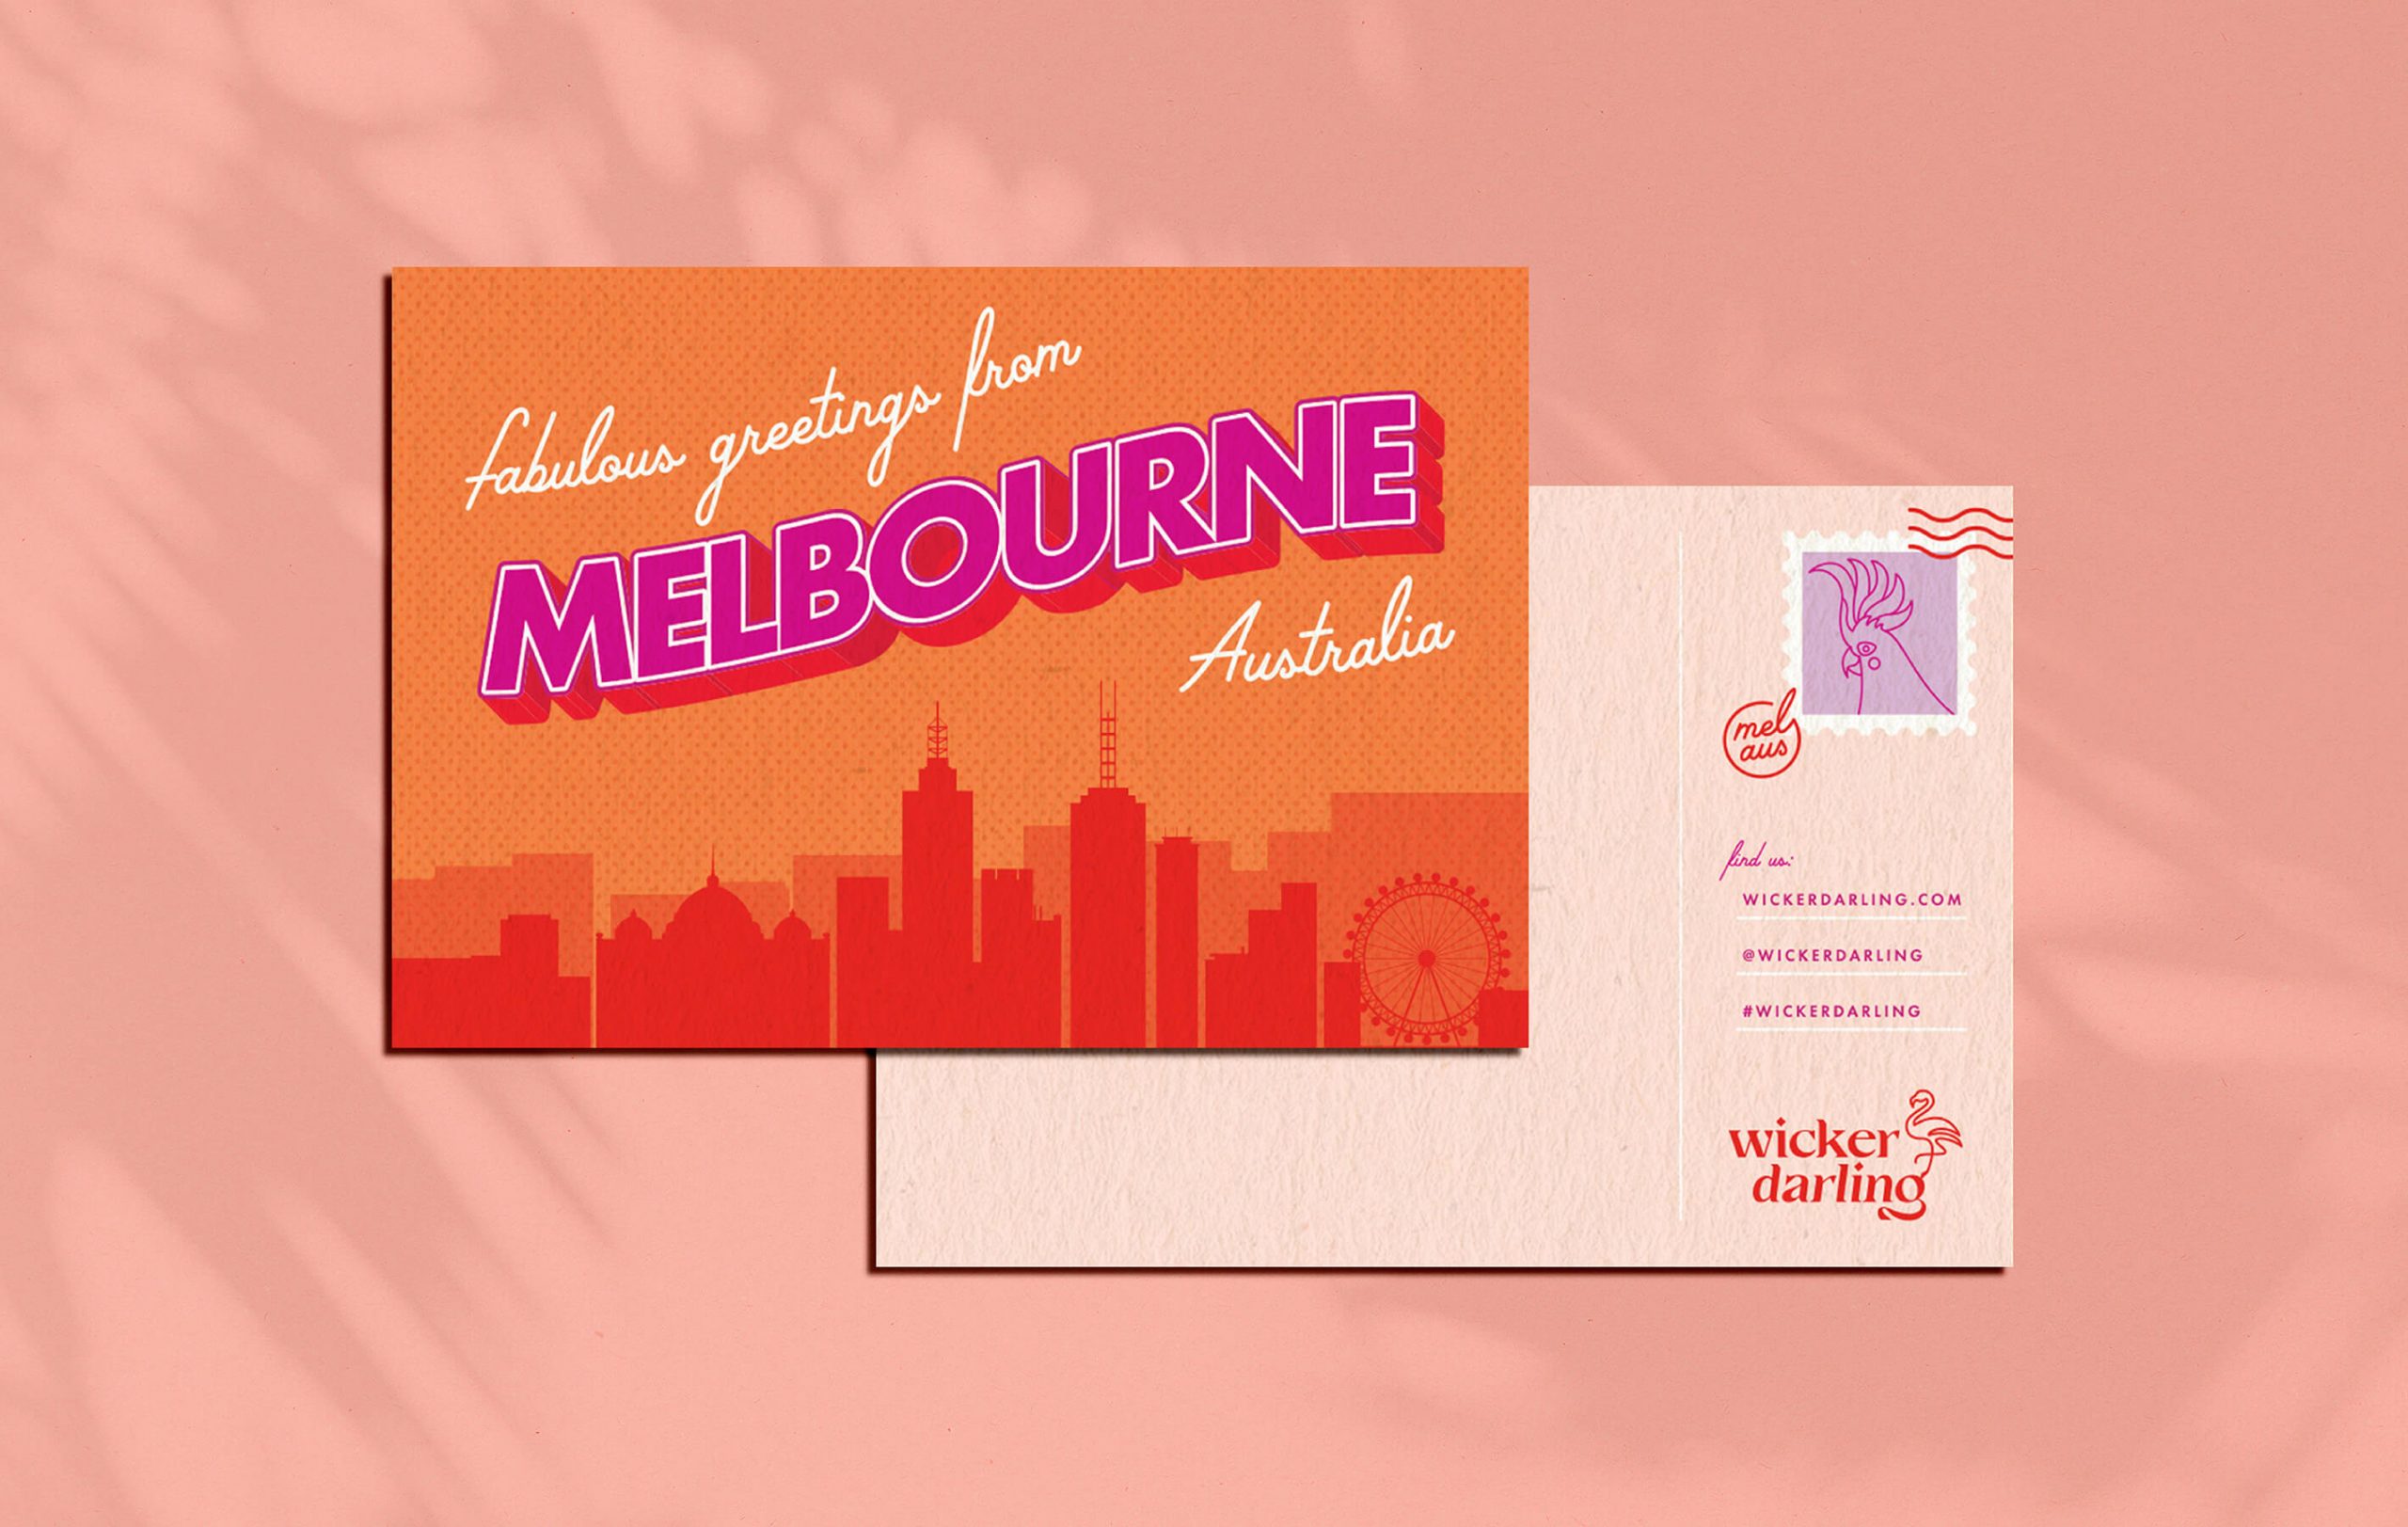 Vintage style postcode of Melbourne Australia. The back is a Wicker Darling thank you card for custom packaging.